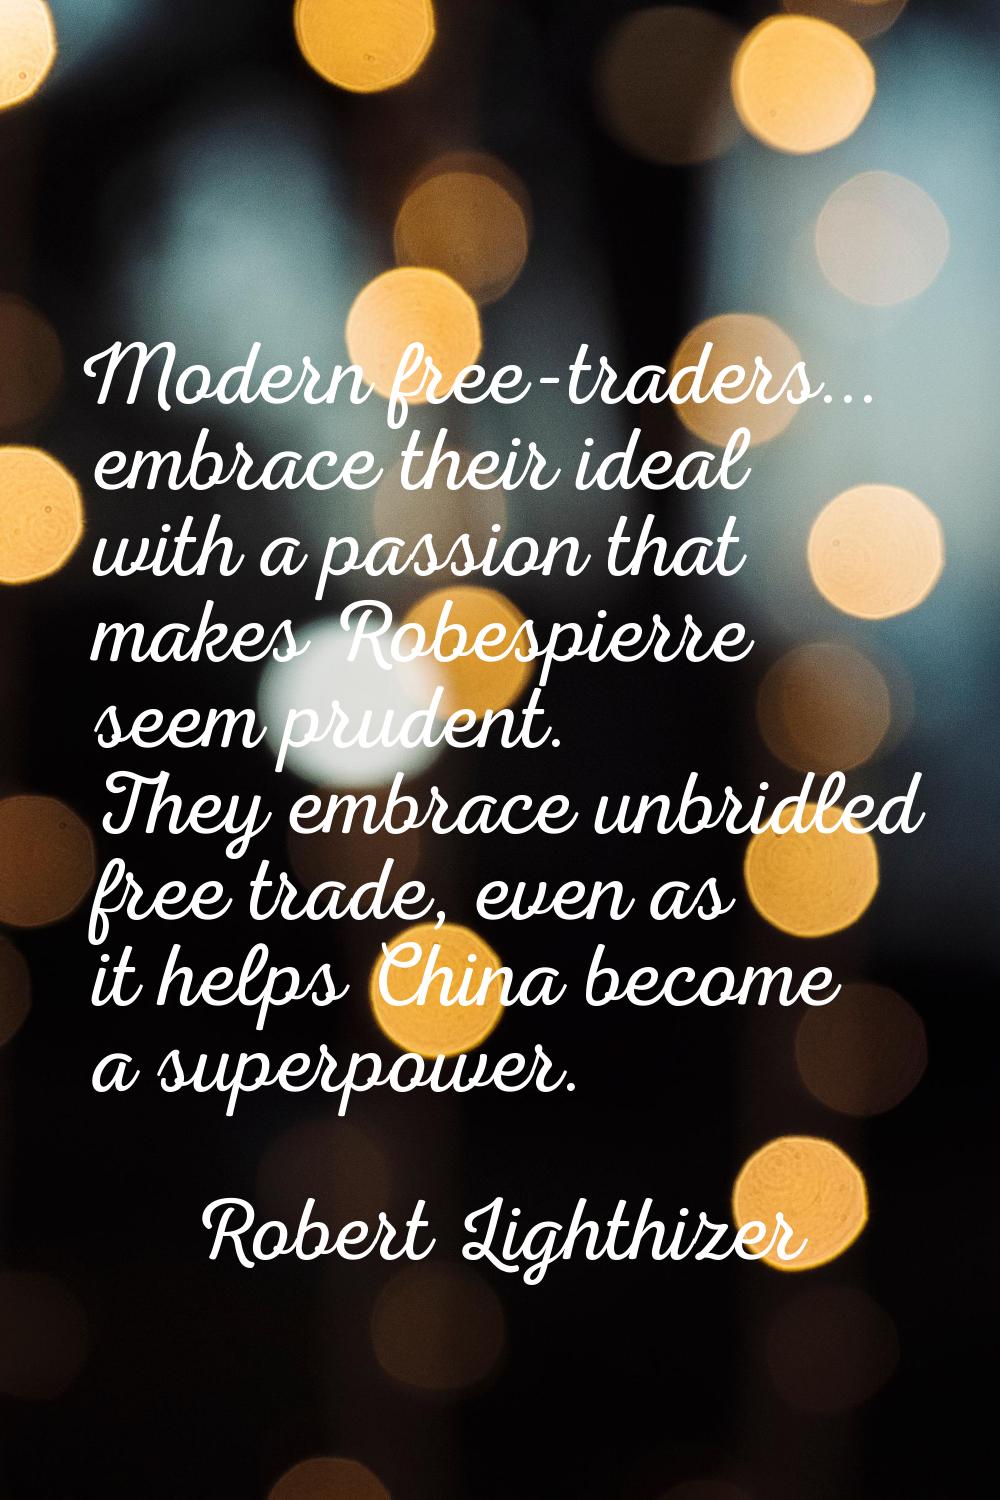 Modern free-traders... embrace their ideal with a passion that makes Robespierre seem prudent. They